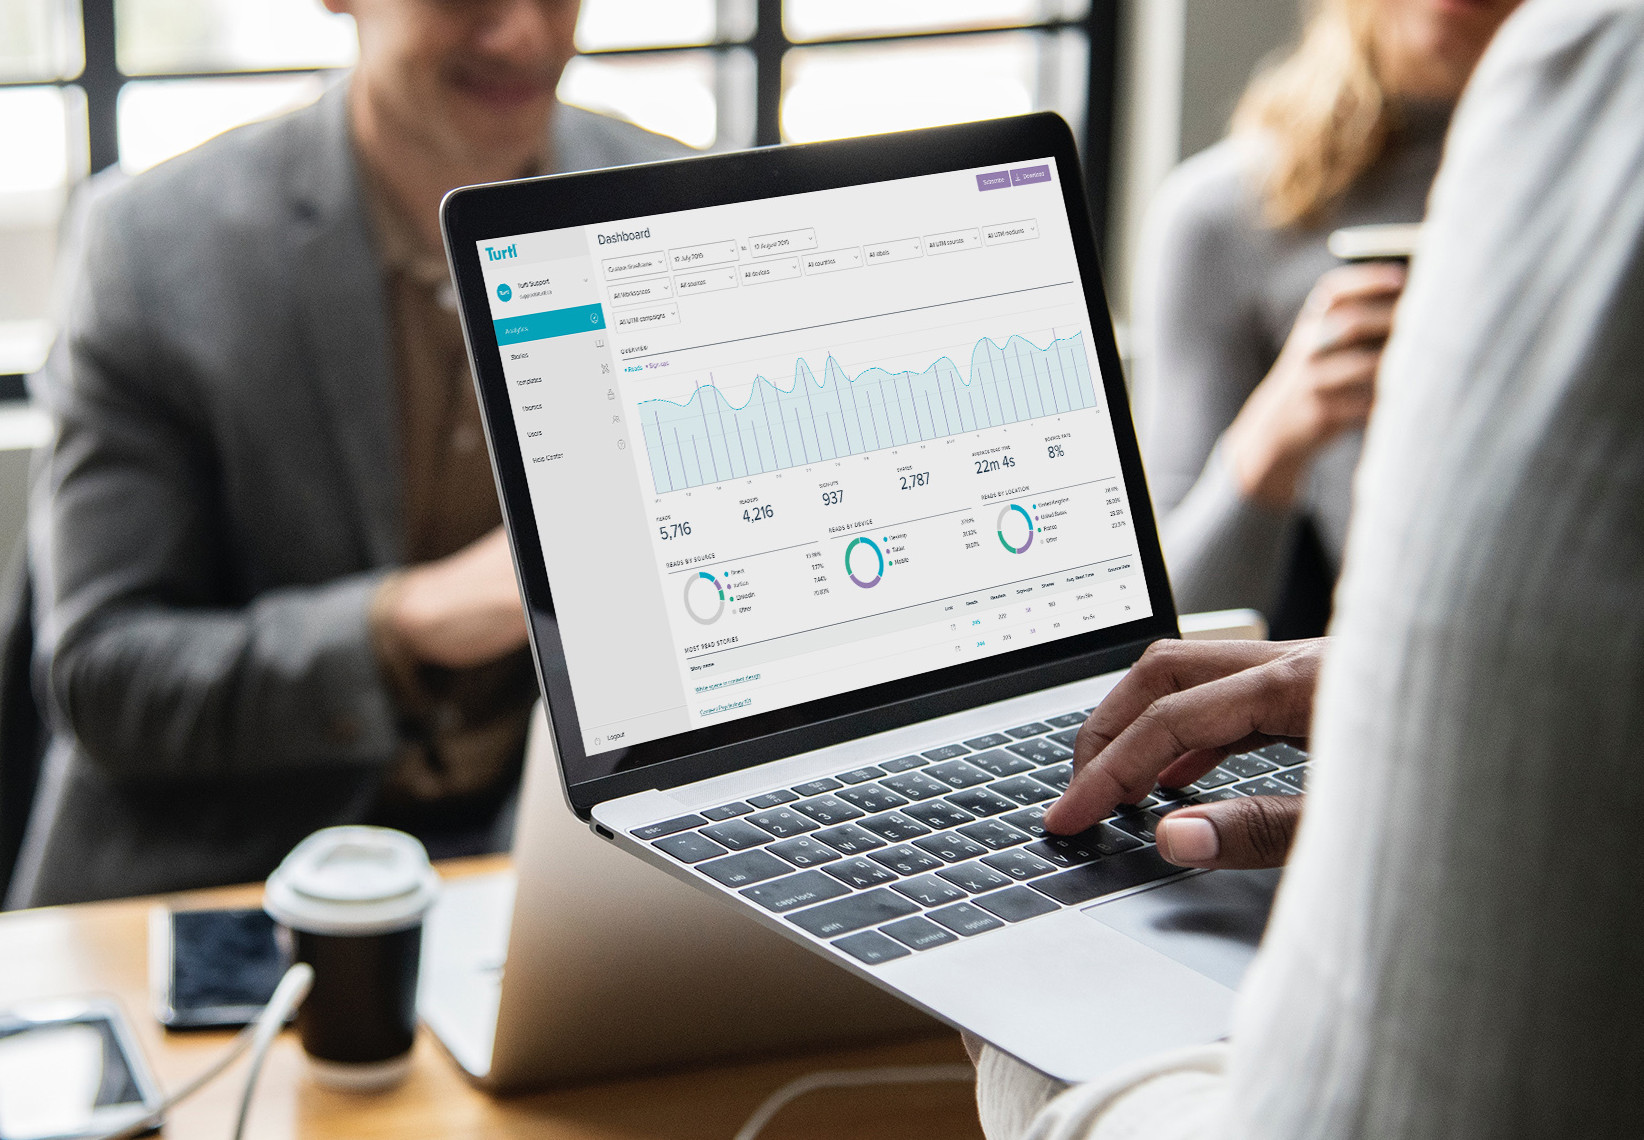 Turtl's Analytics Dashboard gives you insights into your digital brochure's performance